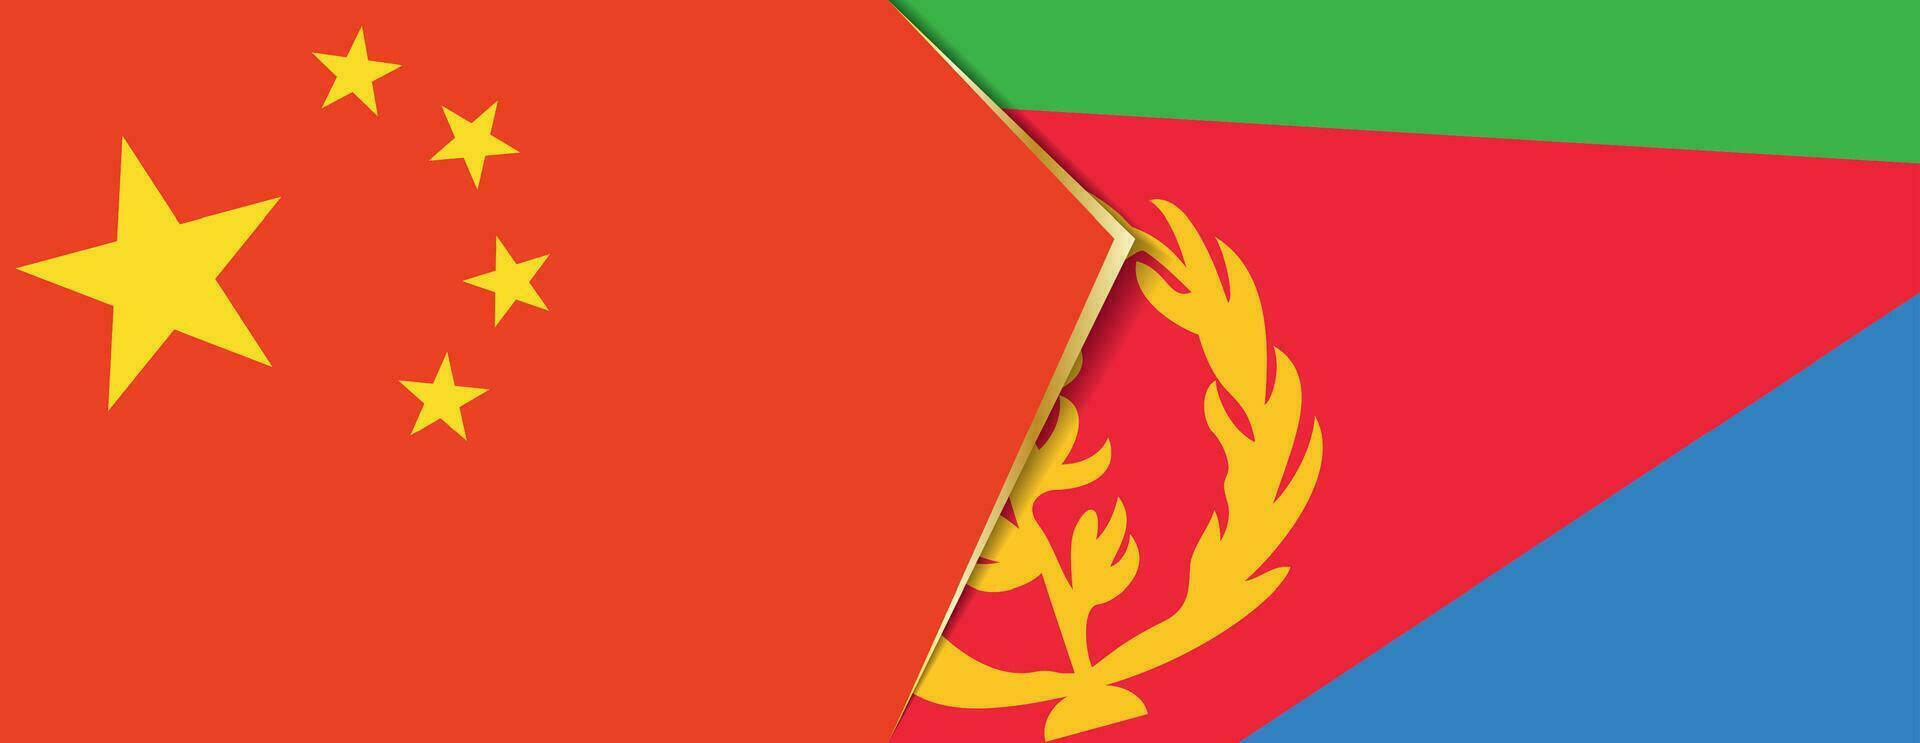 China and Eritrea flags, two vector flags.